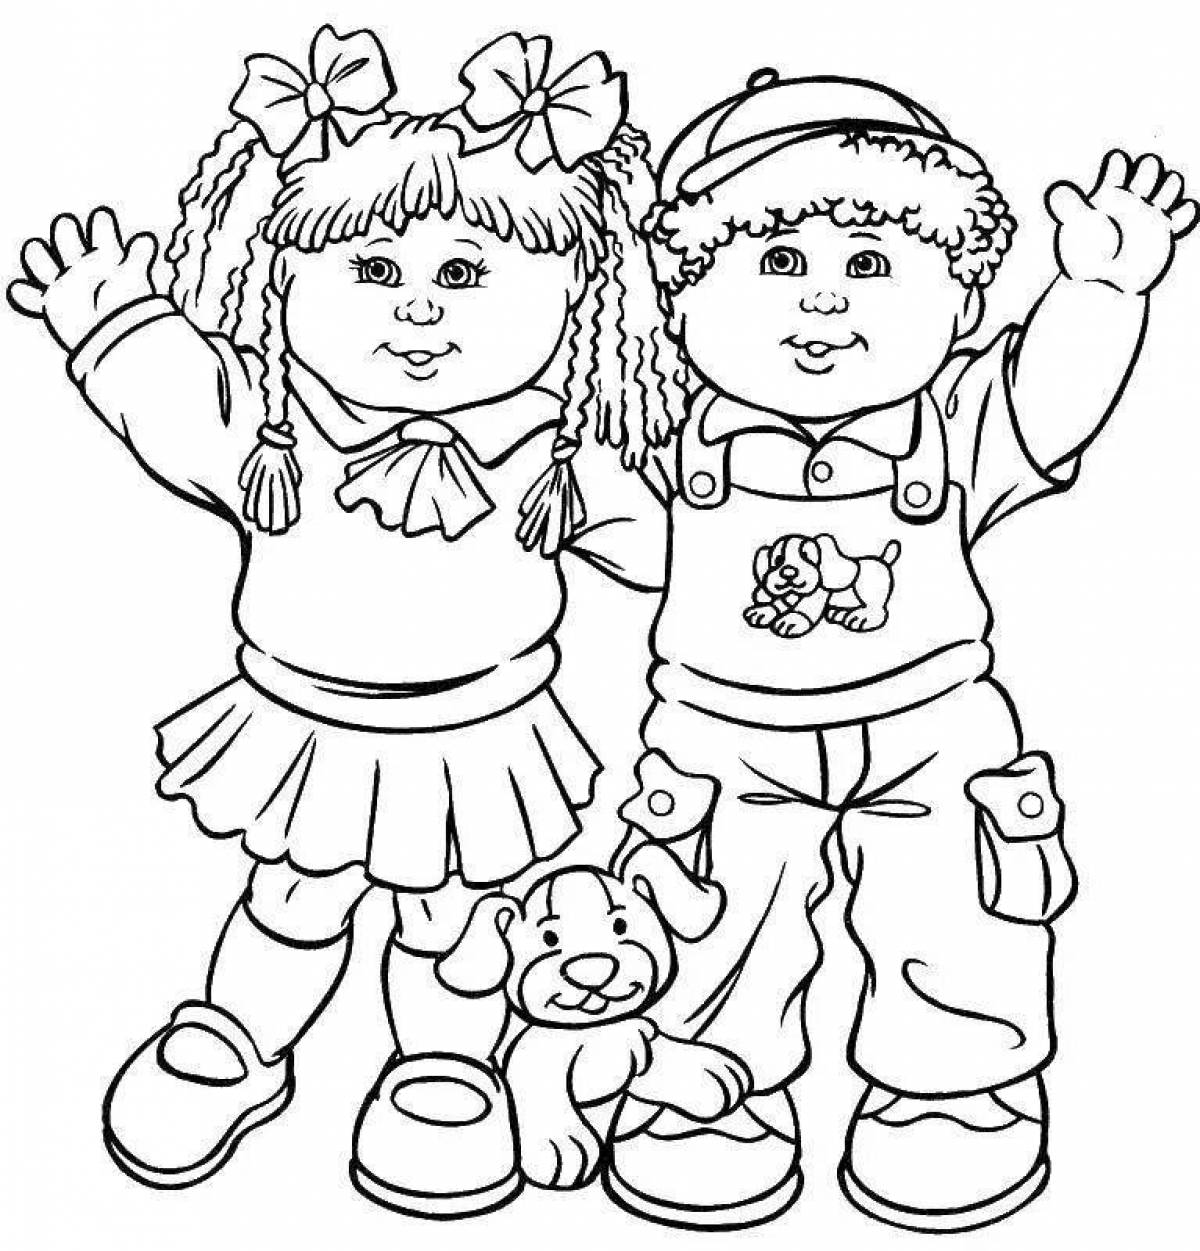 Coloring book for little kids